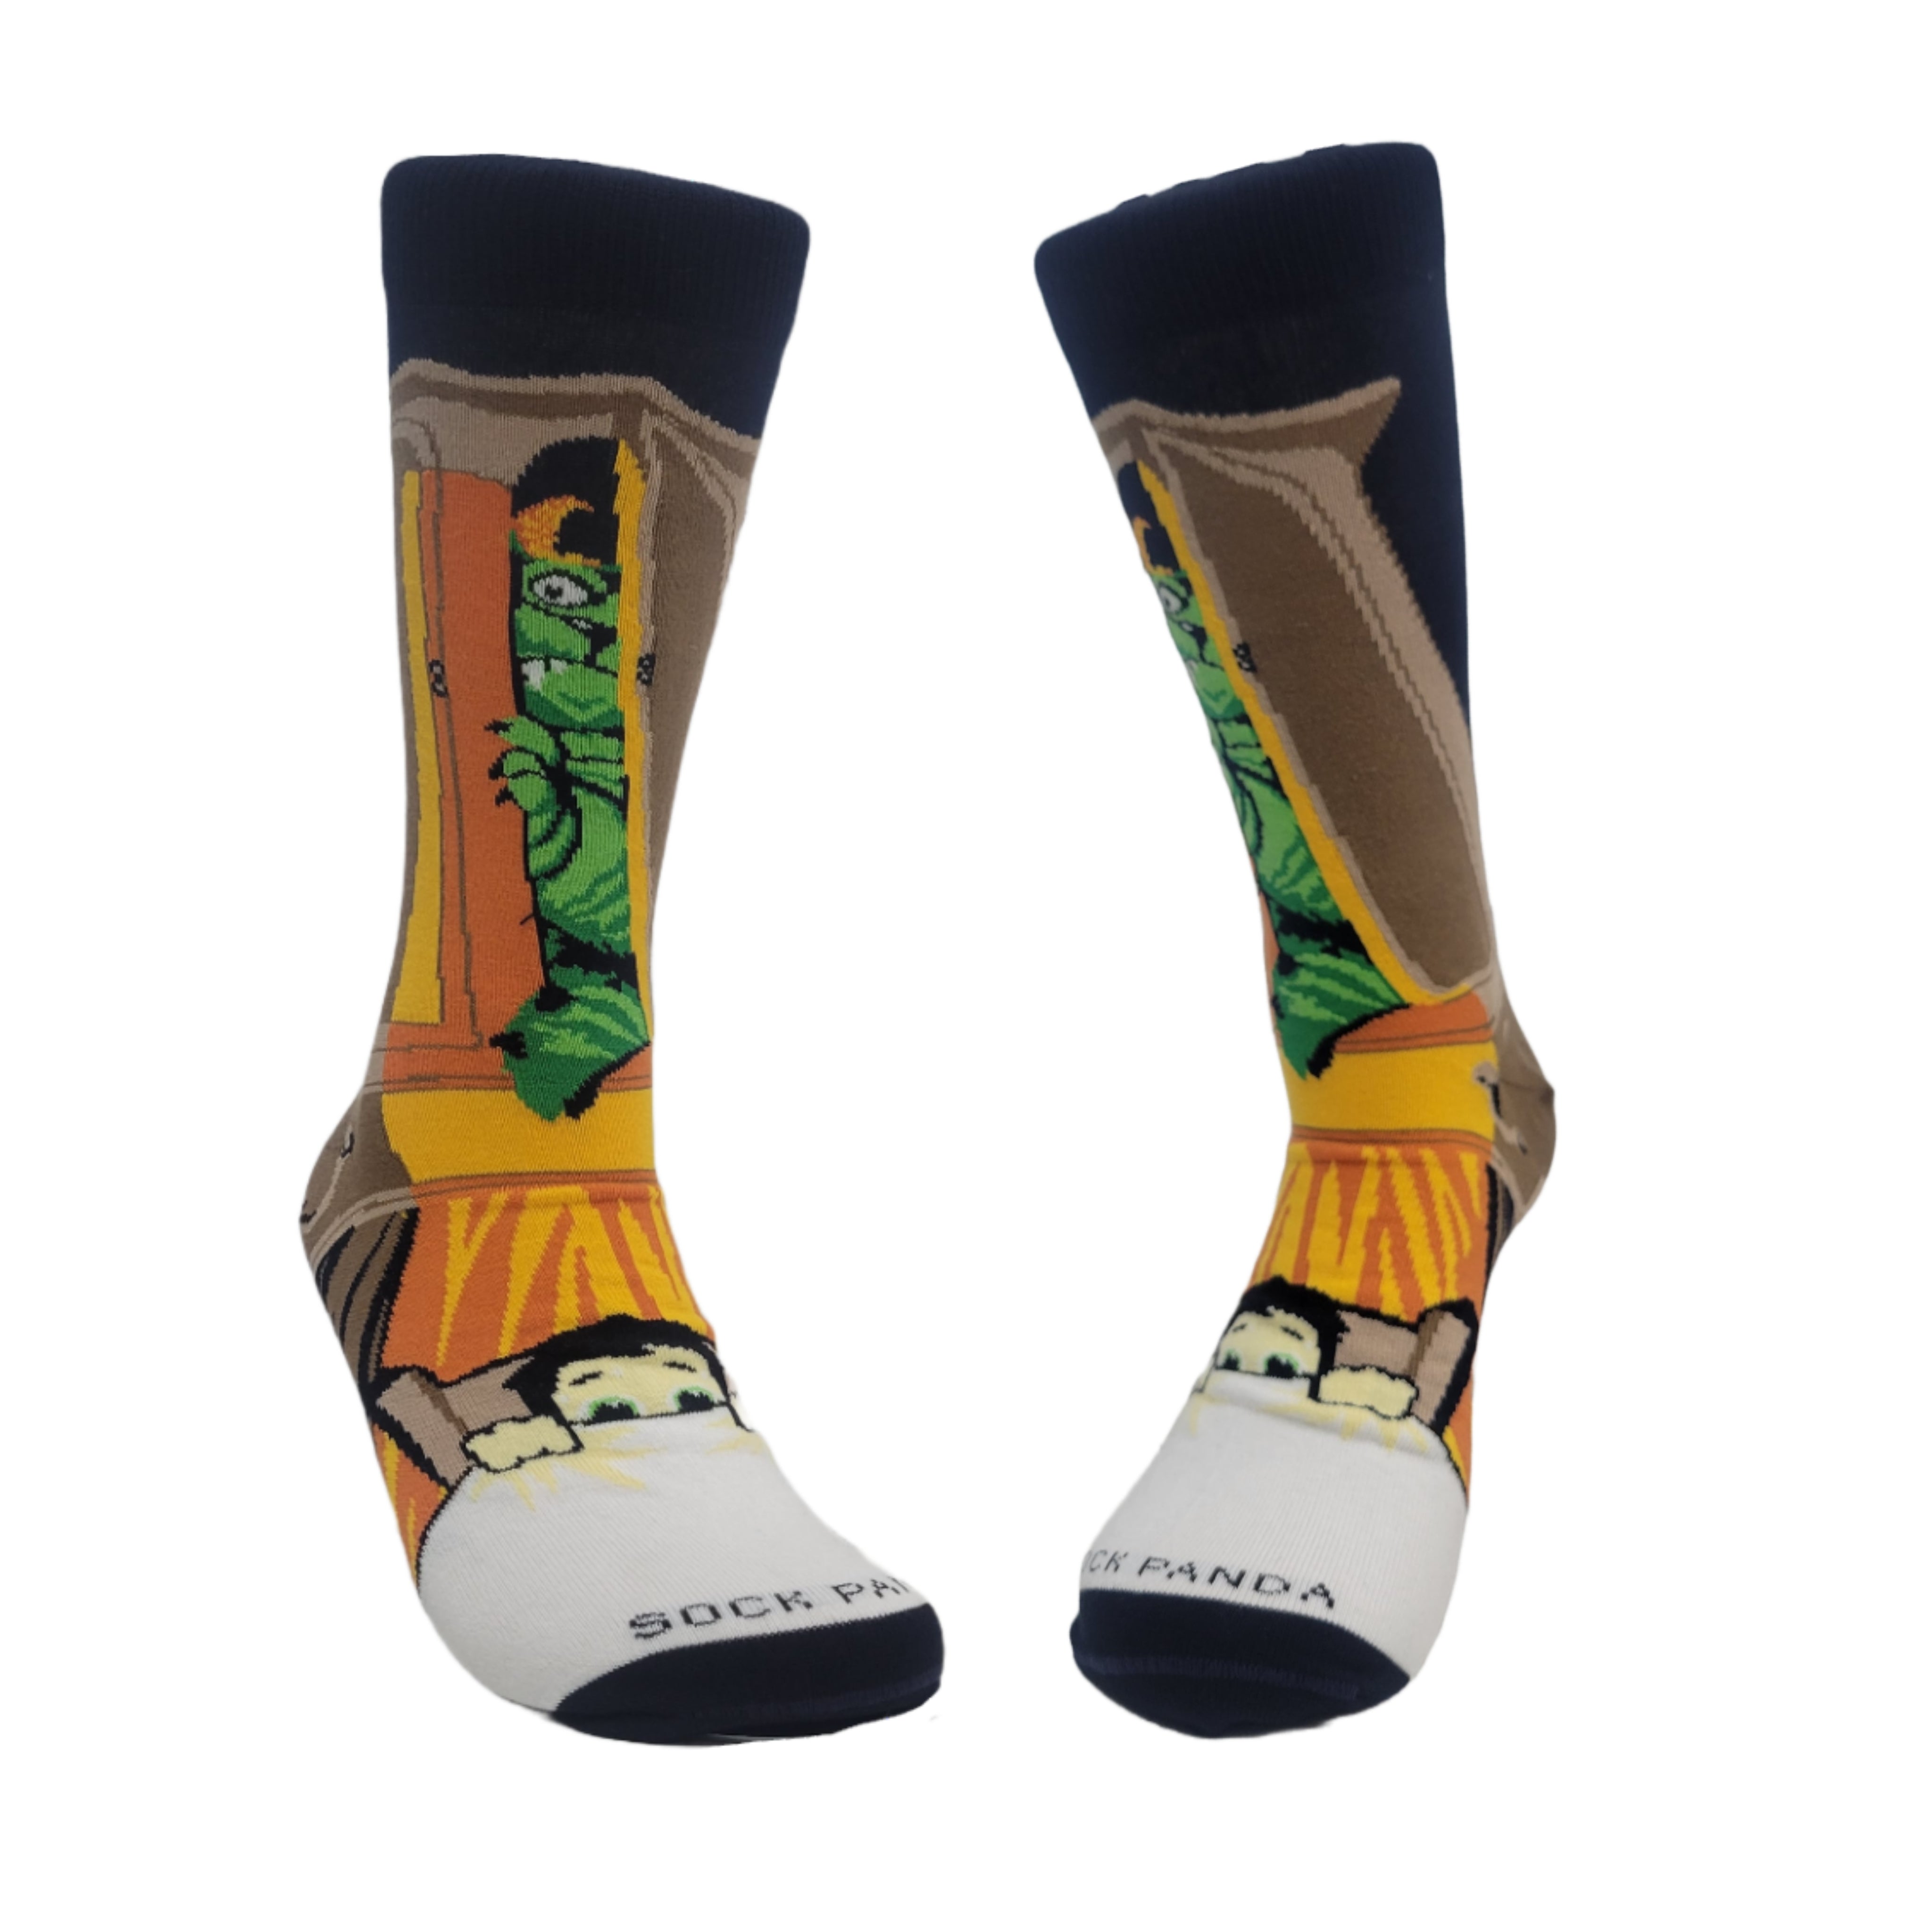 Nightmare Monster in the Closet Socks from the Sock Panda (Adult Large)